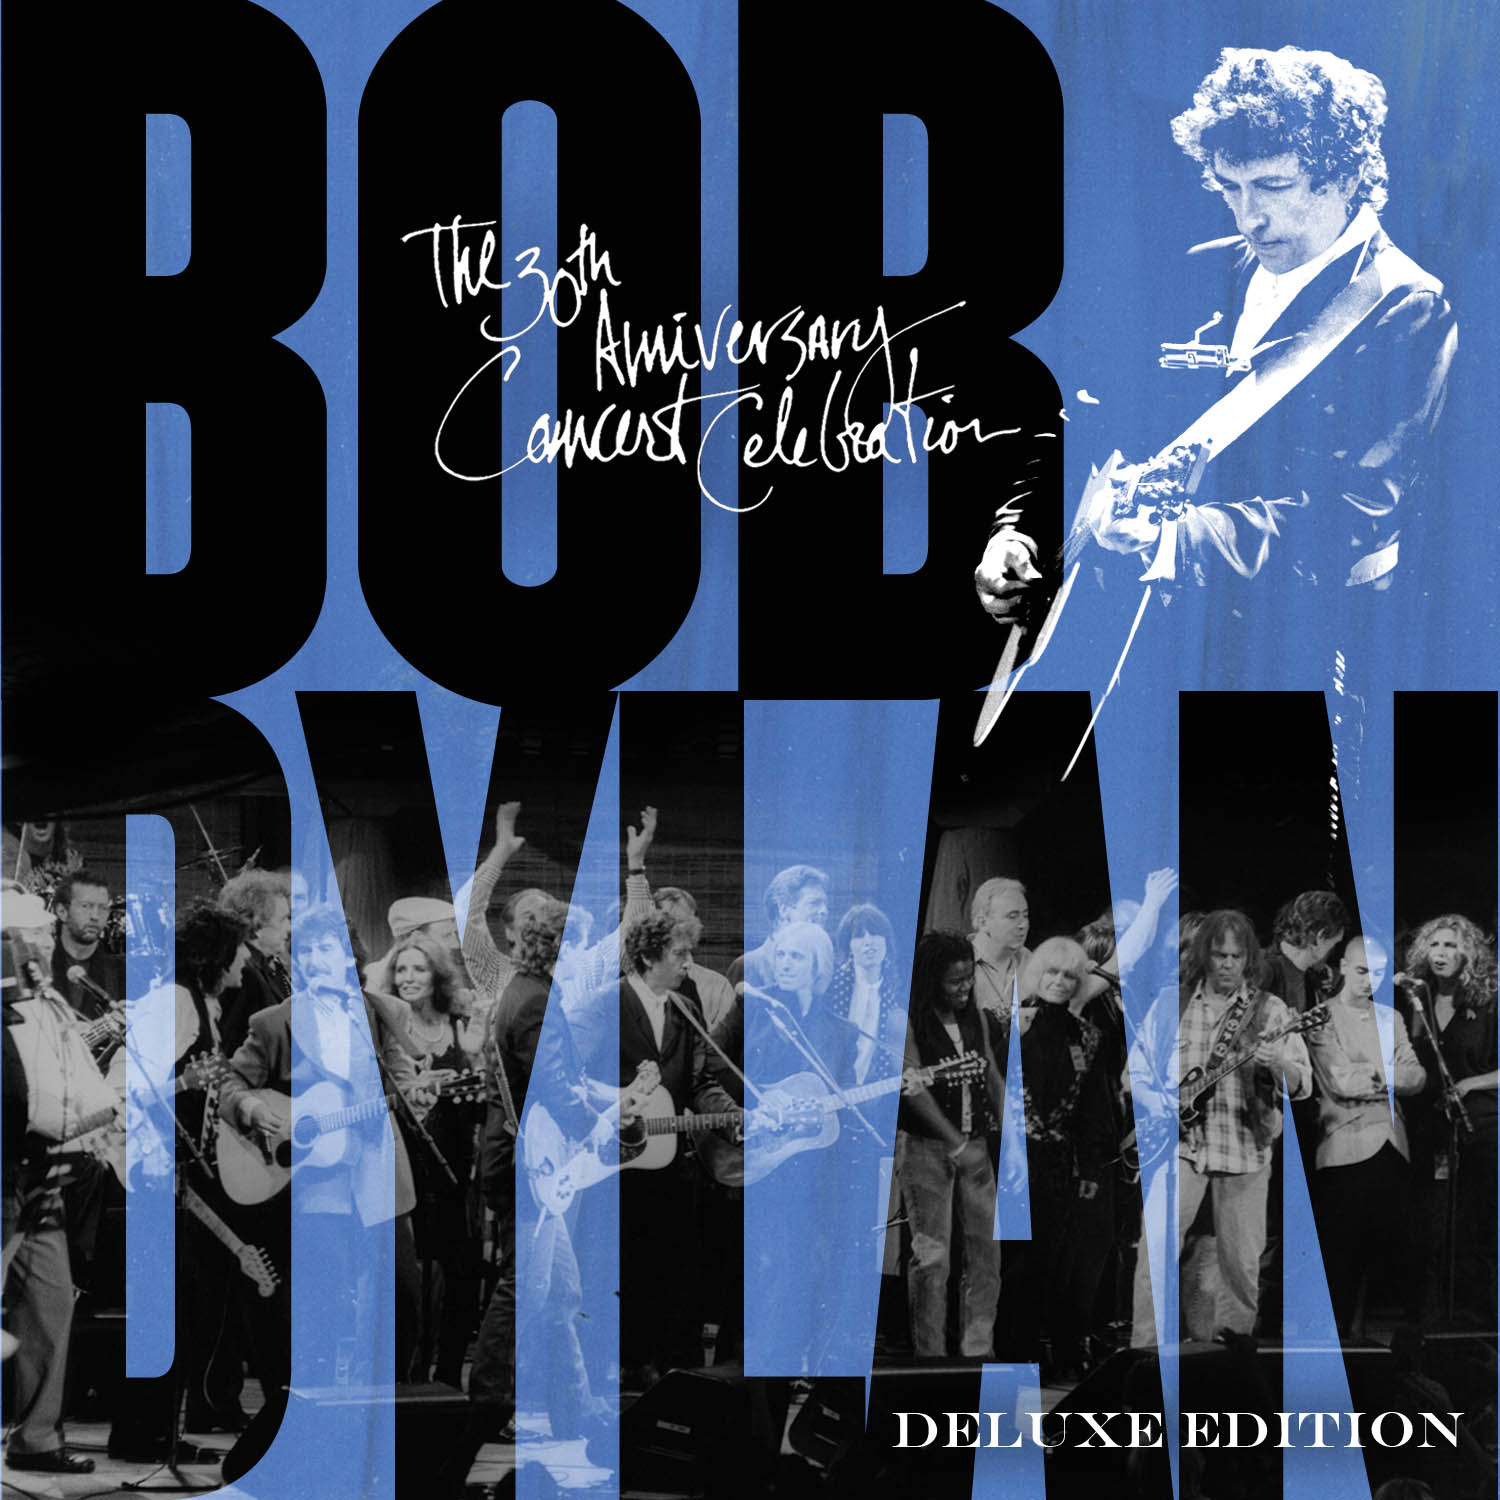 Bob Dylan - "The 30th Anniversary Concert Celebration – Deluxe Edition" (Columbia/Legacy/Sony Music)